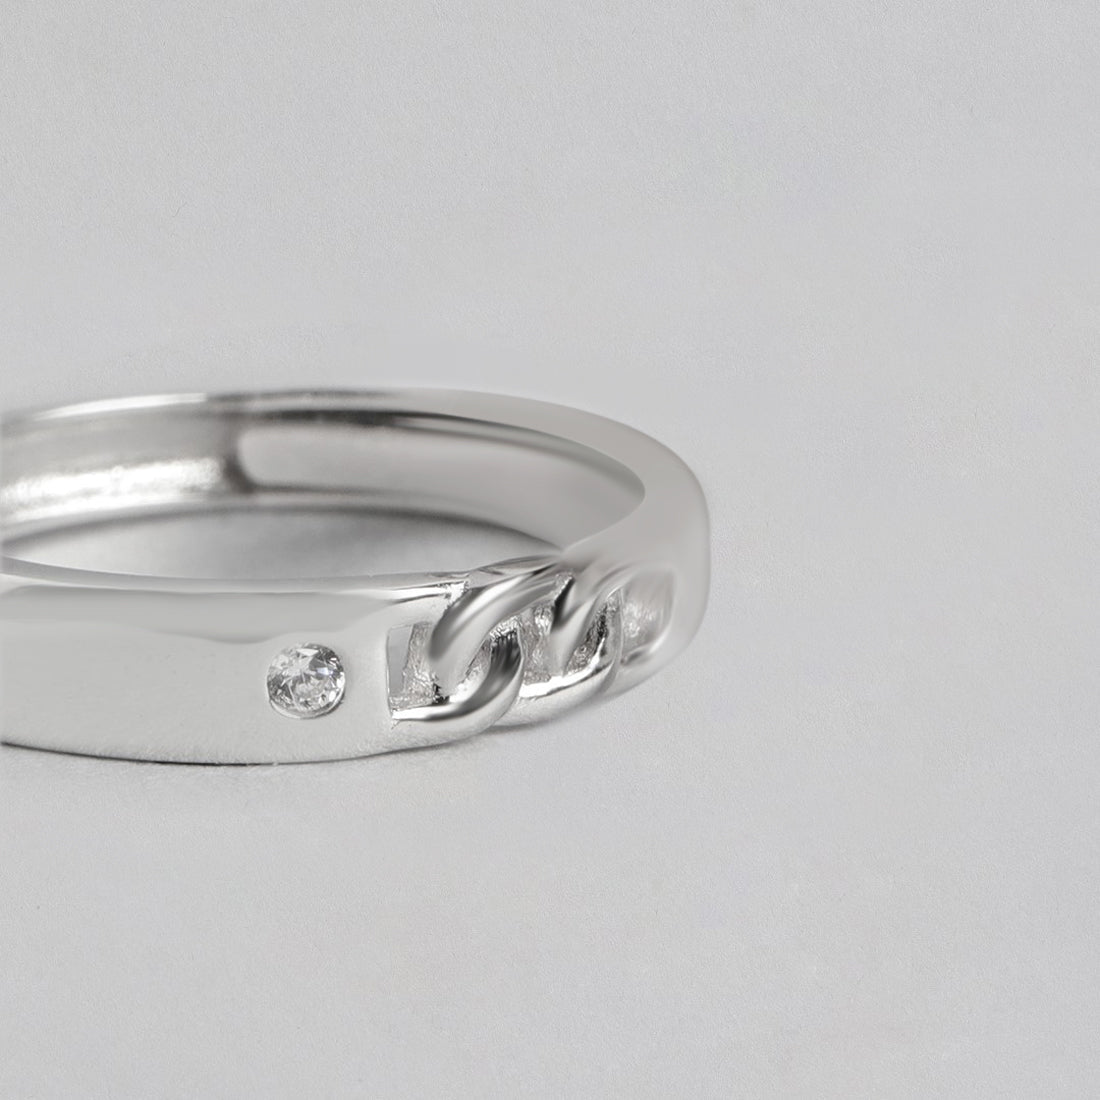 Timeless 925 Sterling Silver Ring for Him